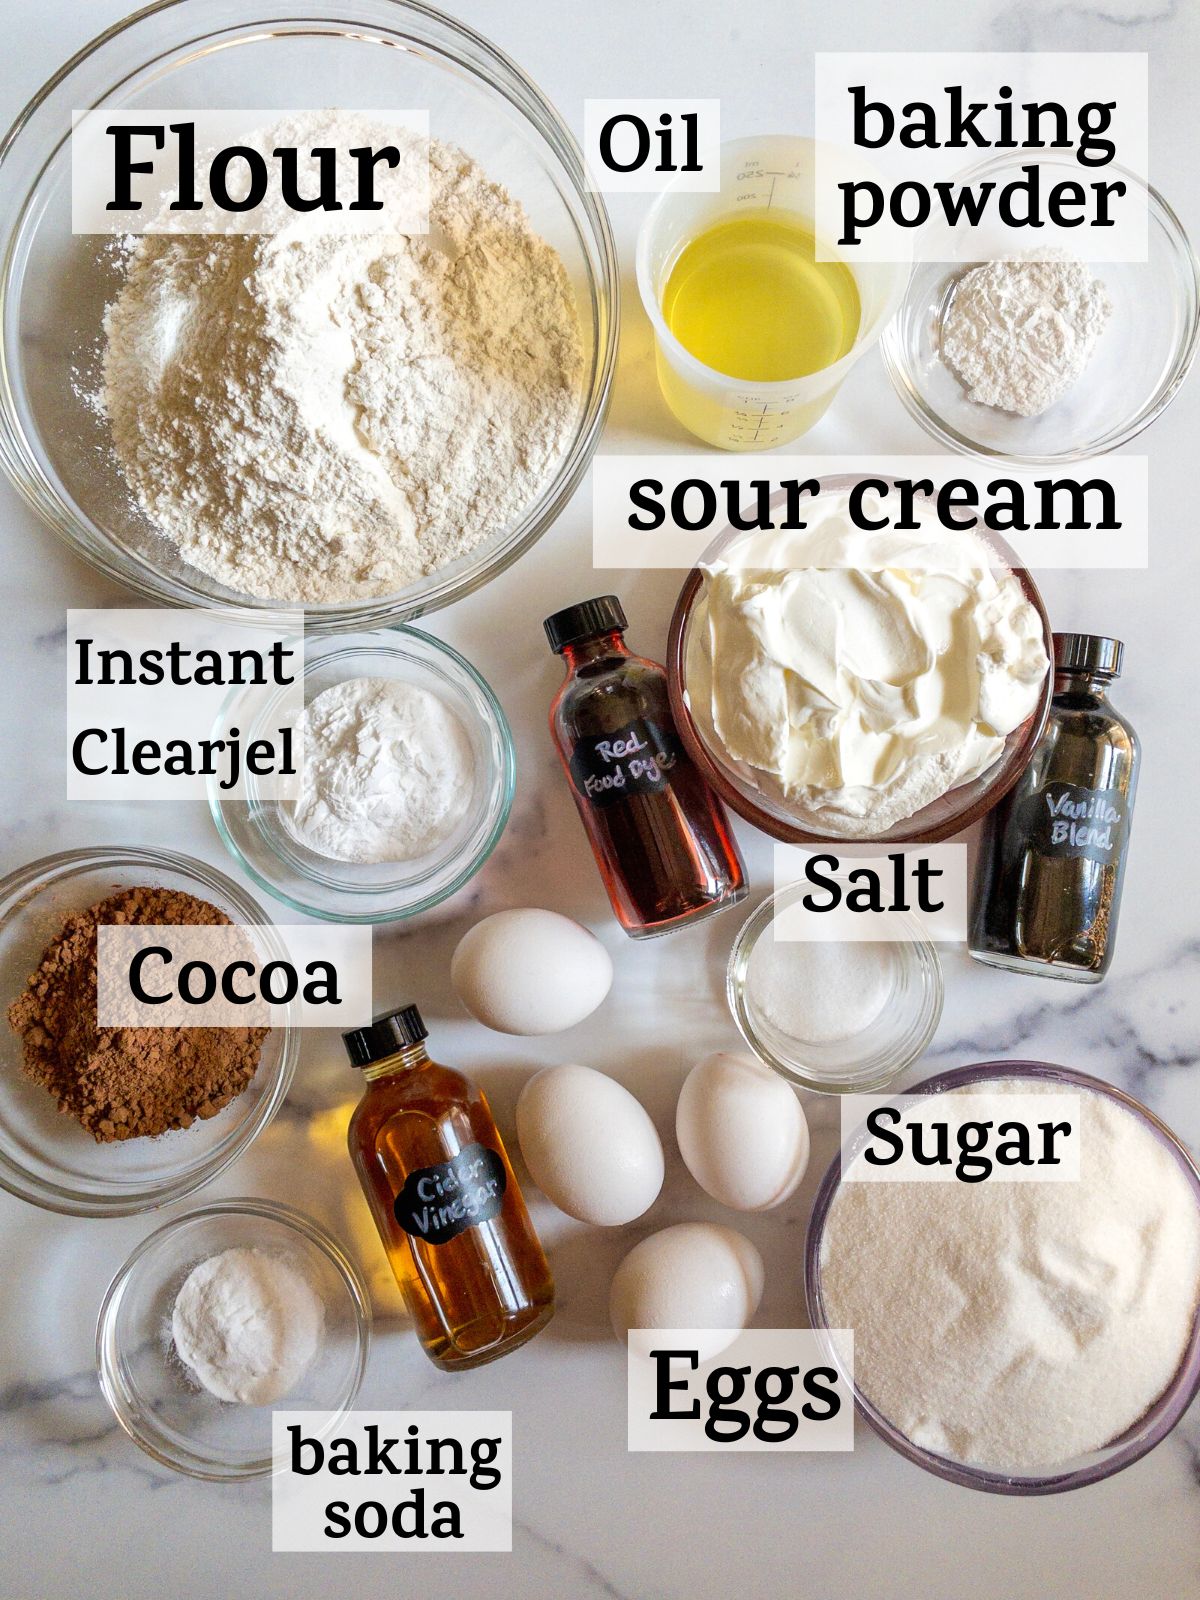 An overhead shot of red velvet cake ingredients, with the text "flour, sugar, instant clearjel, cocoa, vanilla blend, red food dye, cider vinegar, eggs, salt, baking powder, baking soda, sour cream, oil.